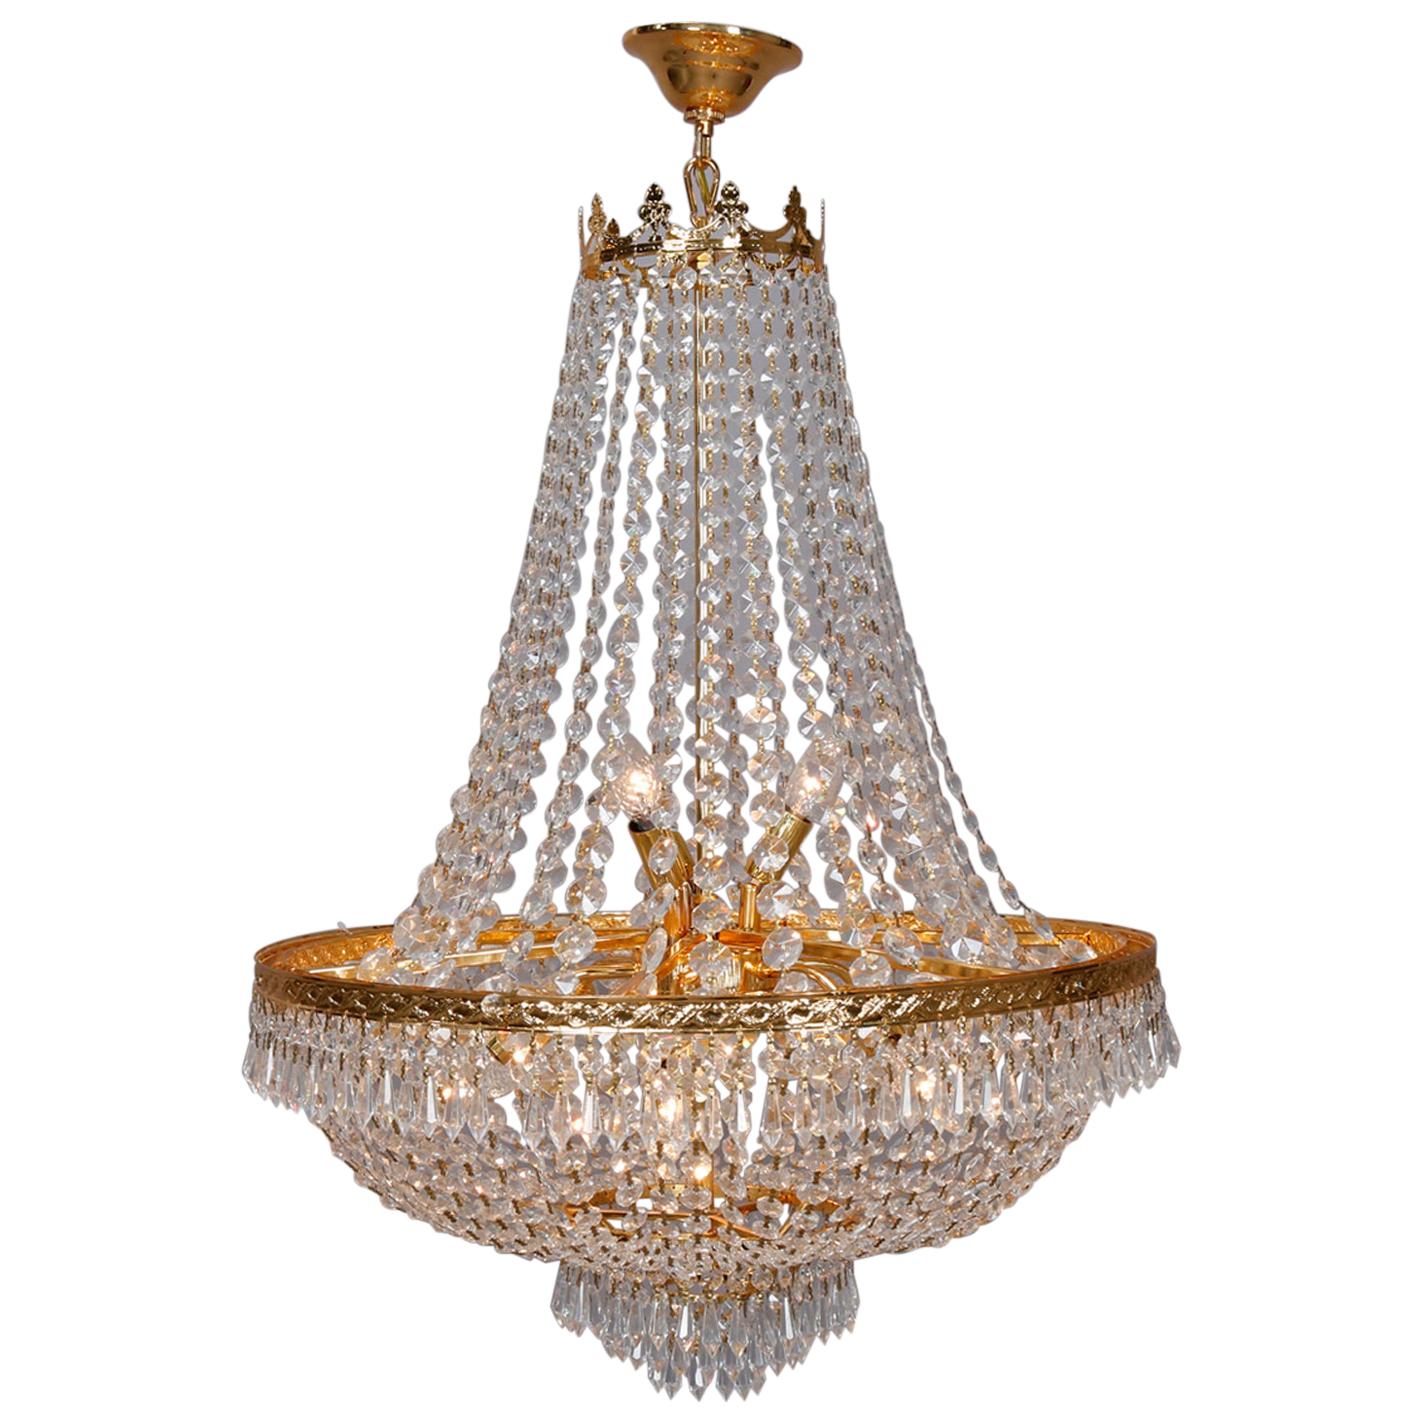 Vintage French Empire Sac a Pearl Crystal and Gilt Metal Chandelier